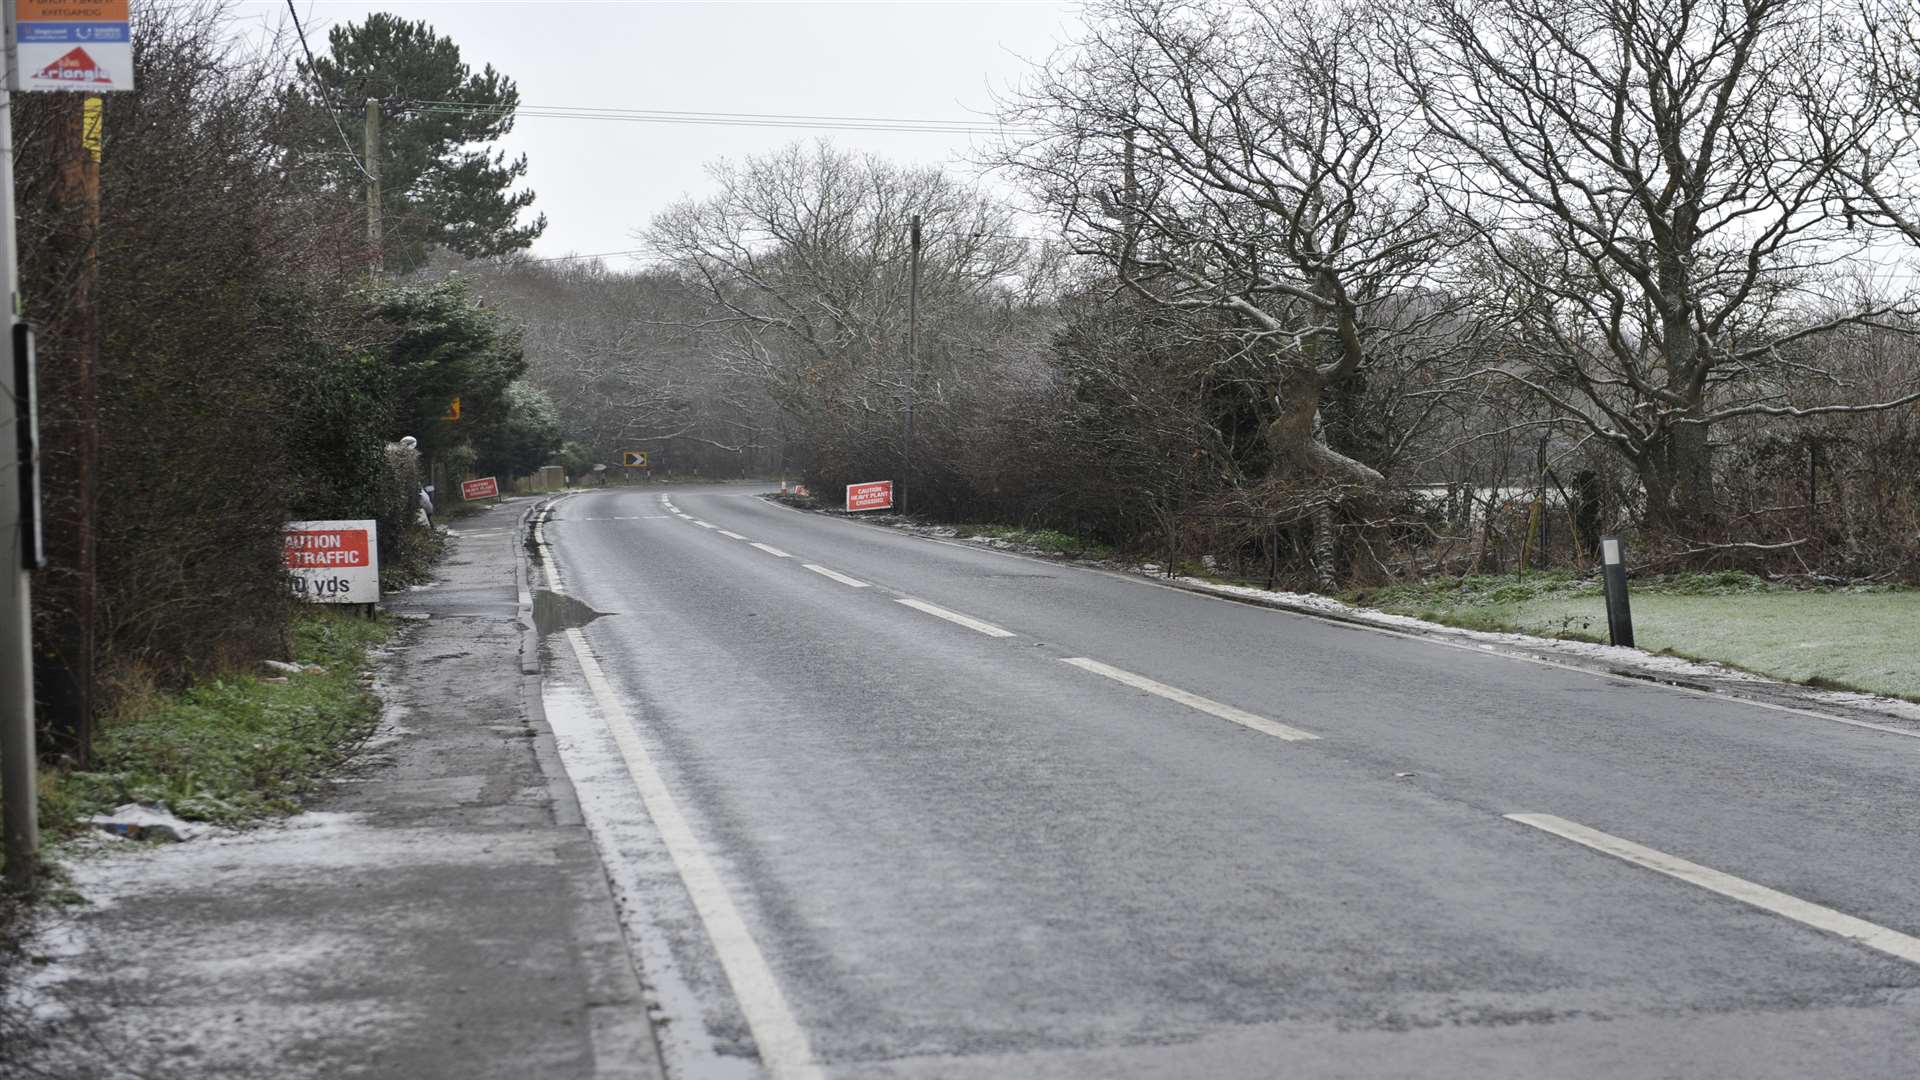 The accident site on the A291 near Calcott Hill